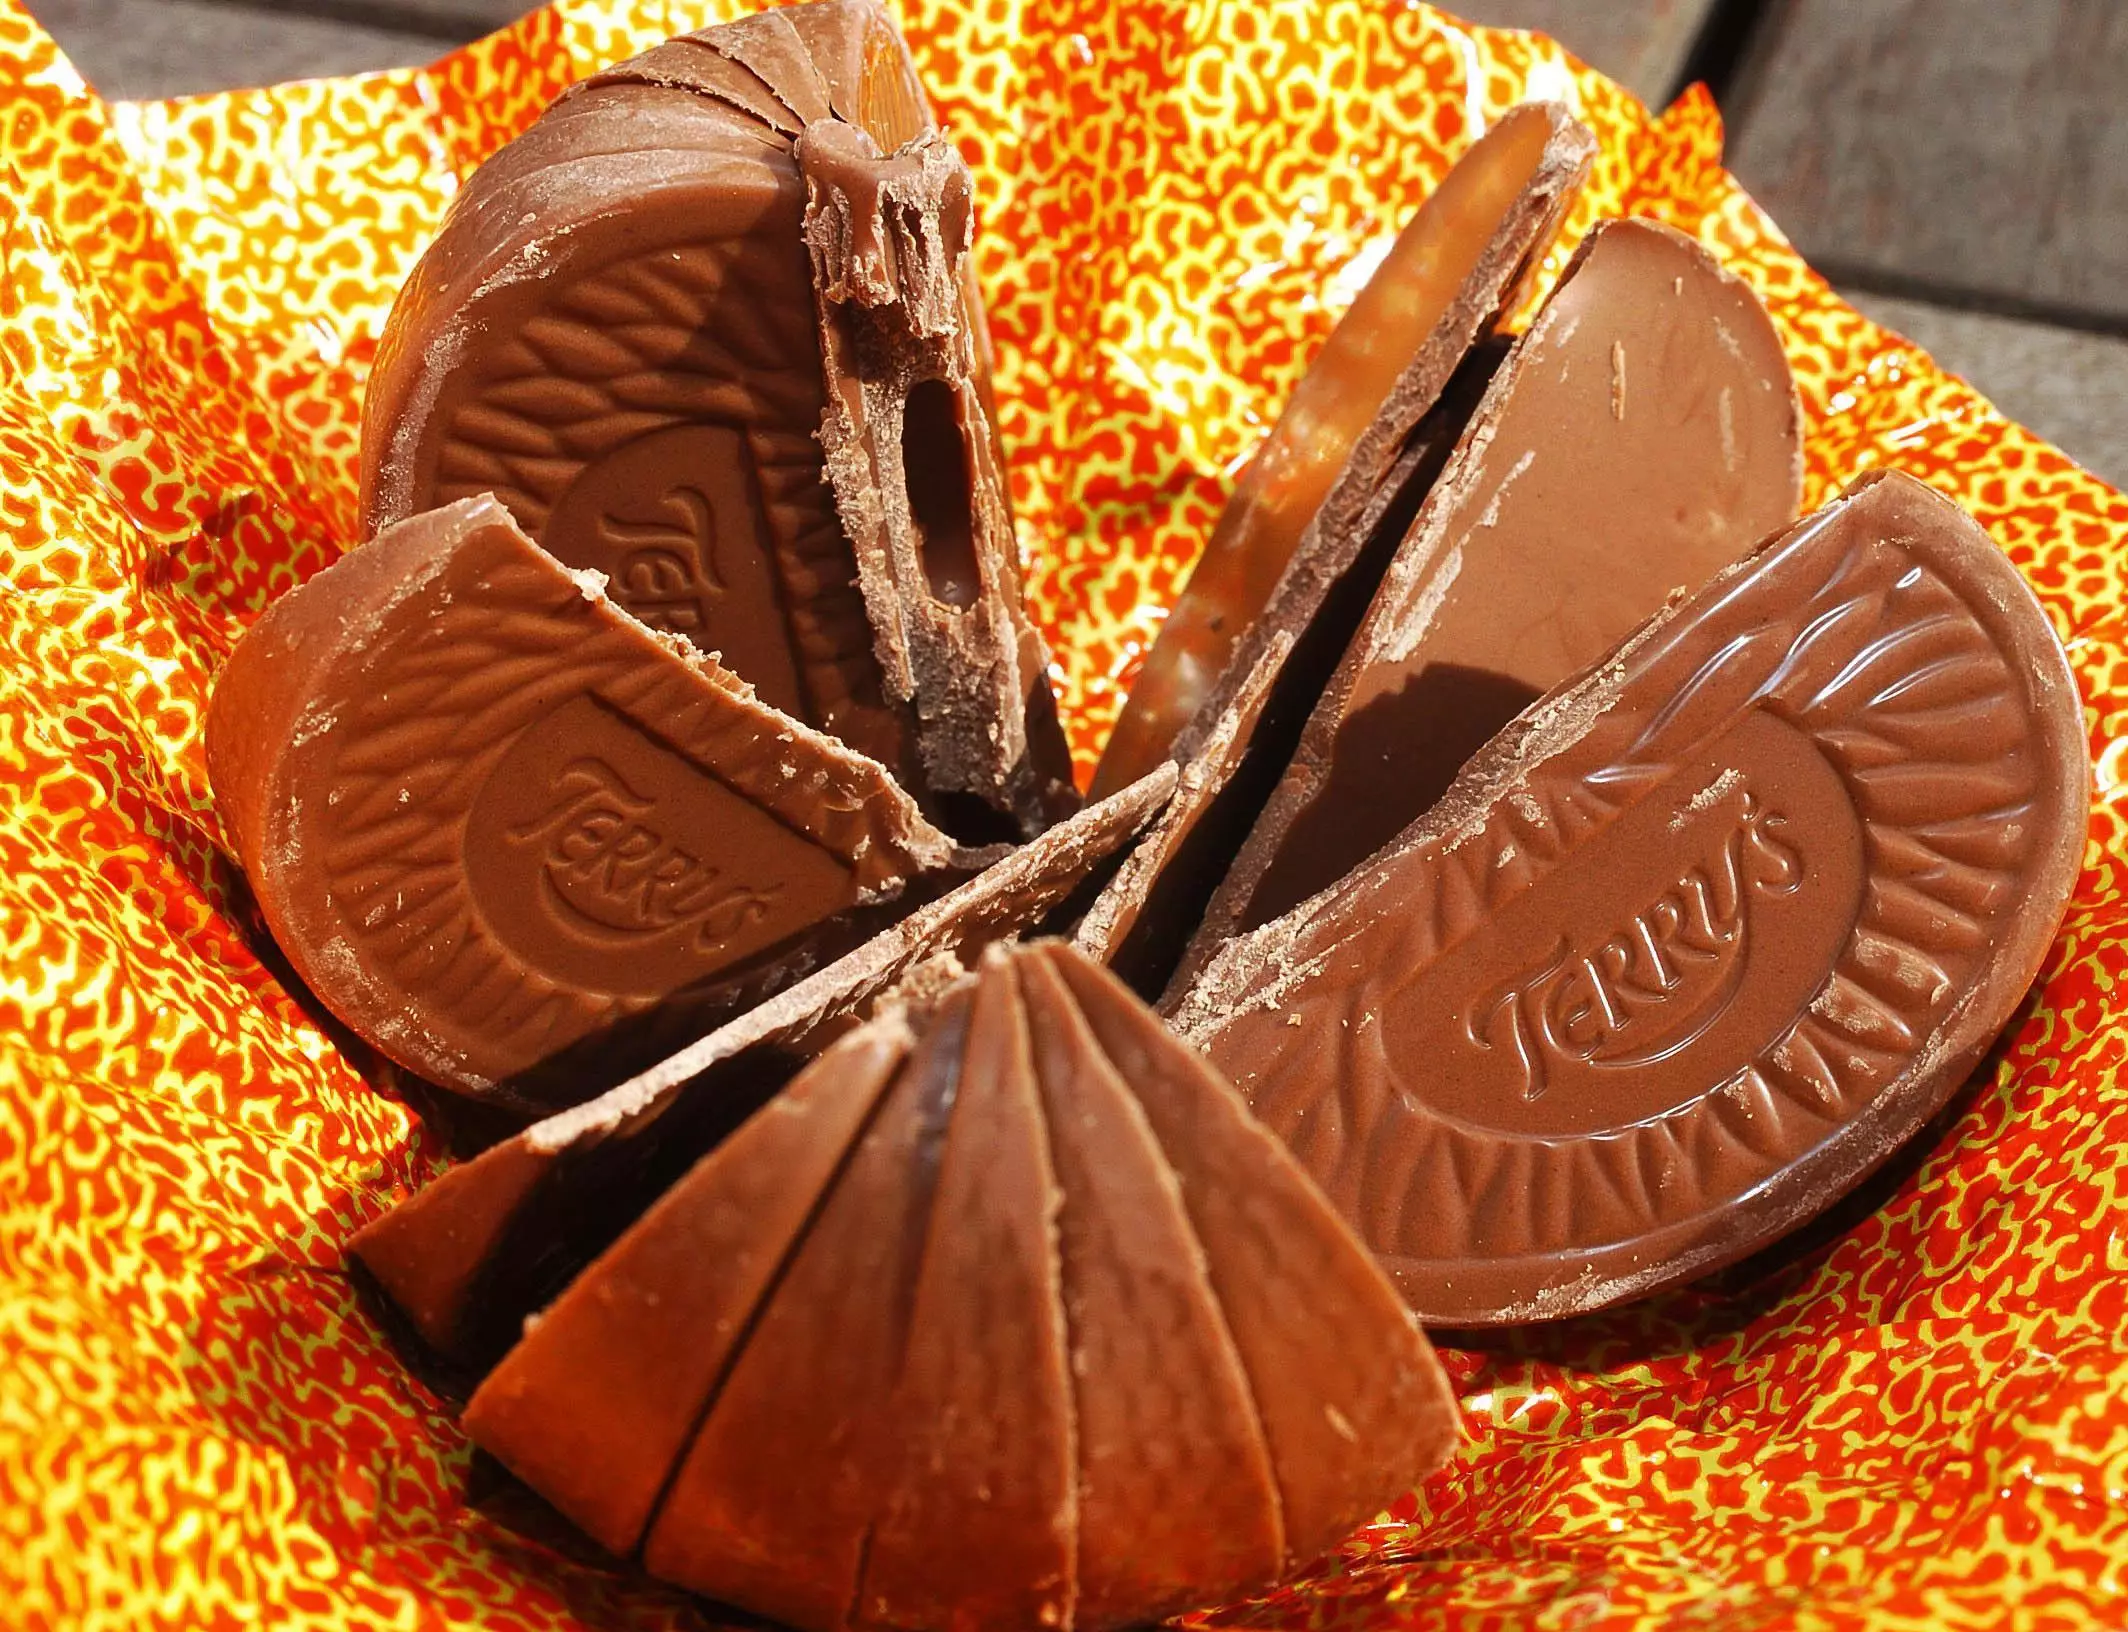 Terry's Chocolate Orange now comes in chocolate bar form (